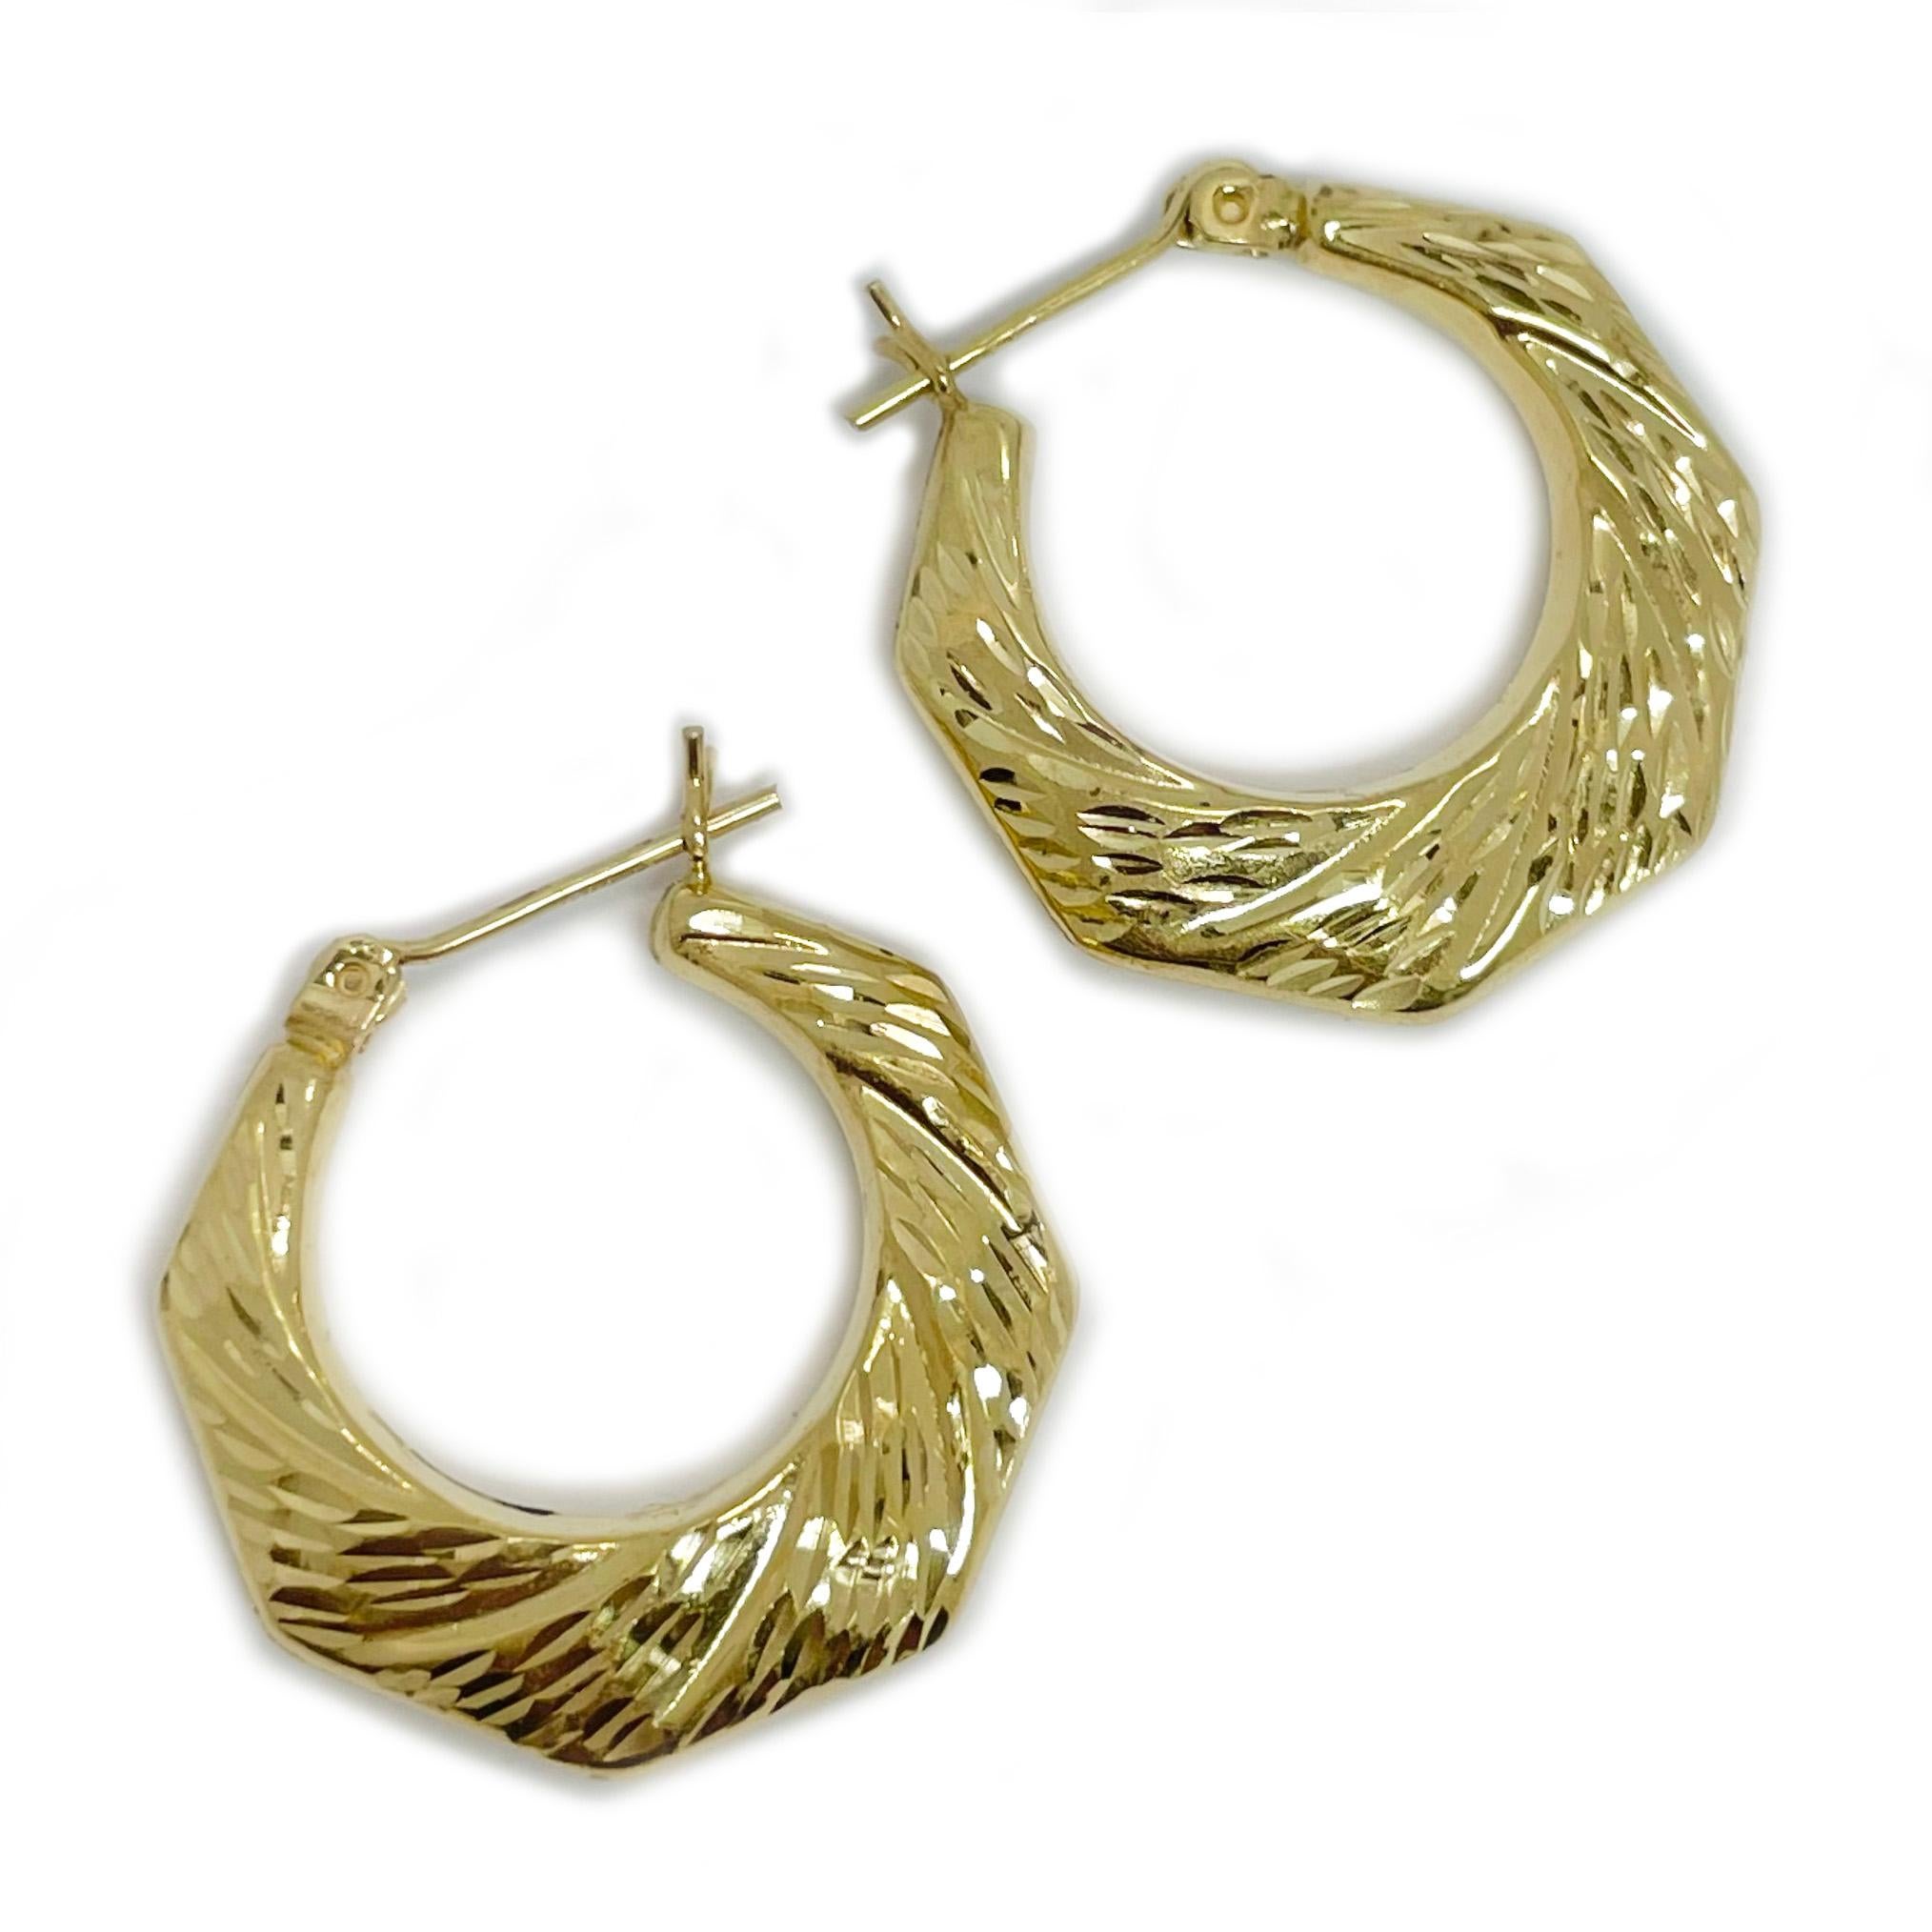 14 Karat Yellow Gold Diamond Cut Hoop Earrings. The earrings are lightweight and could be worn daily or with a dressier outfit. The outside shape is has straight lines while the inside shape is circular with diamond cut details on both side. The